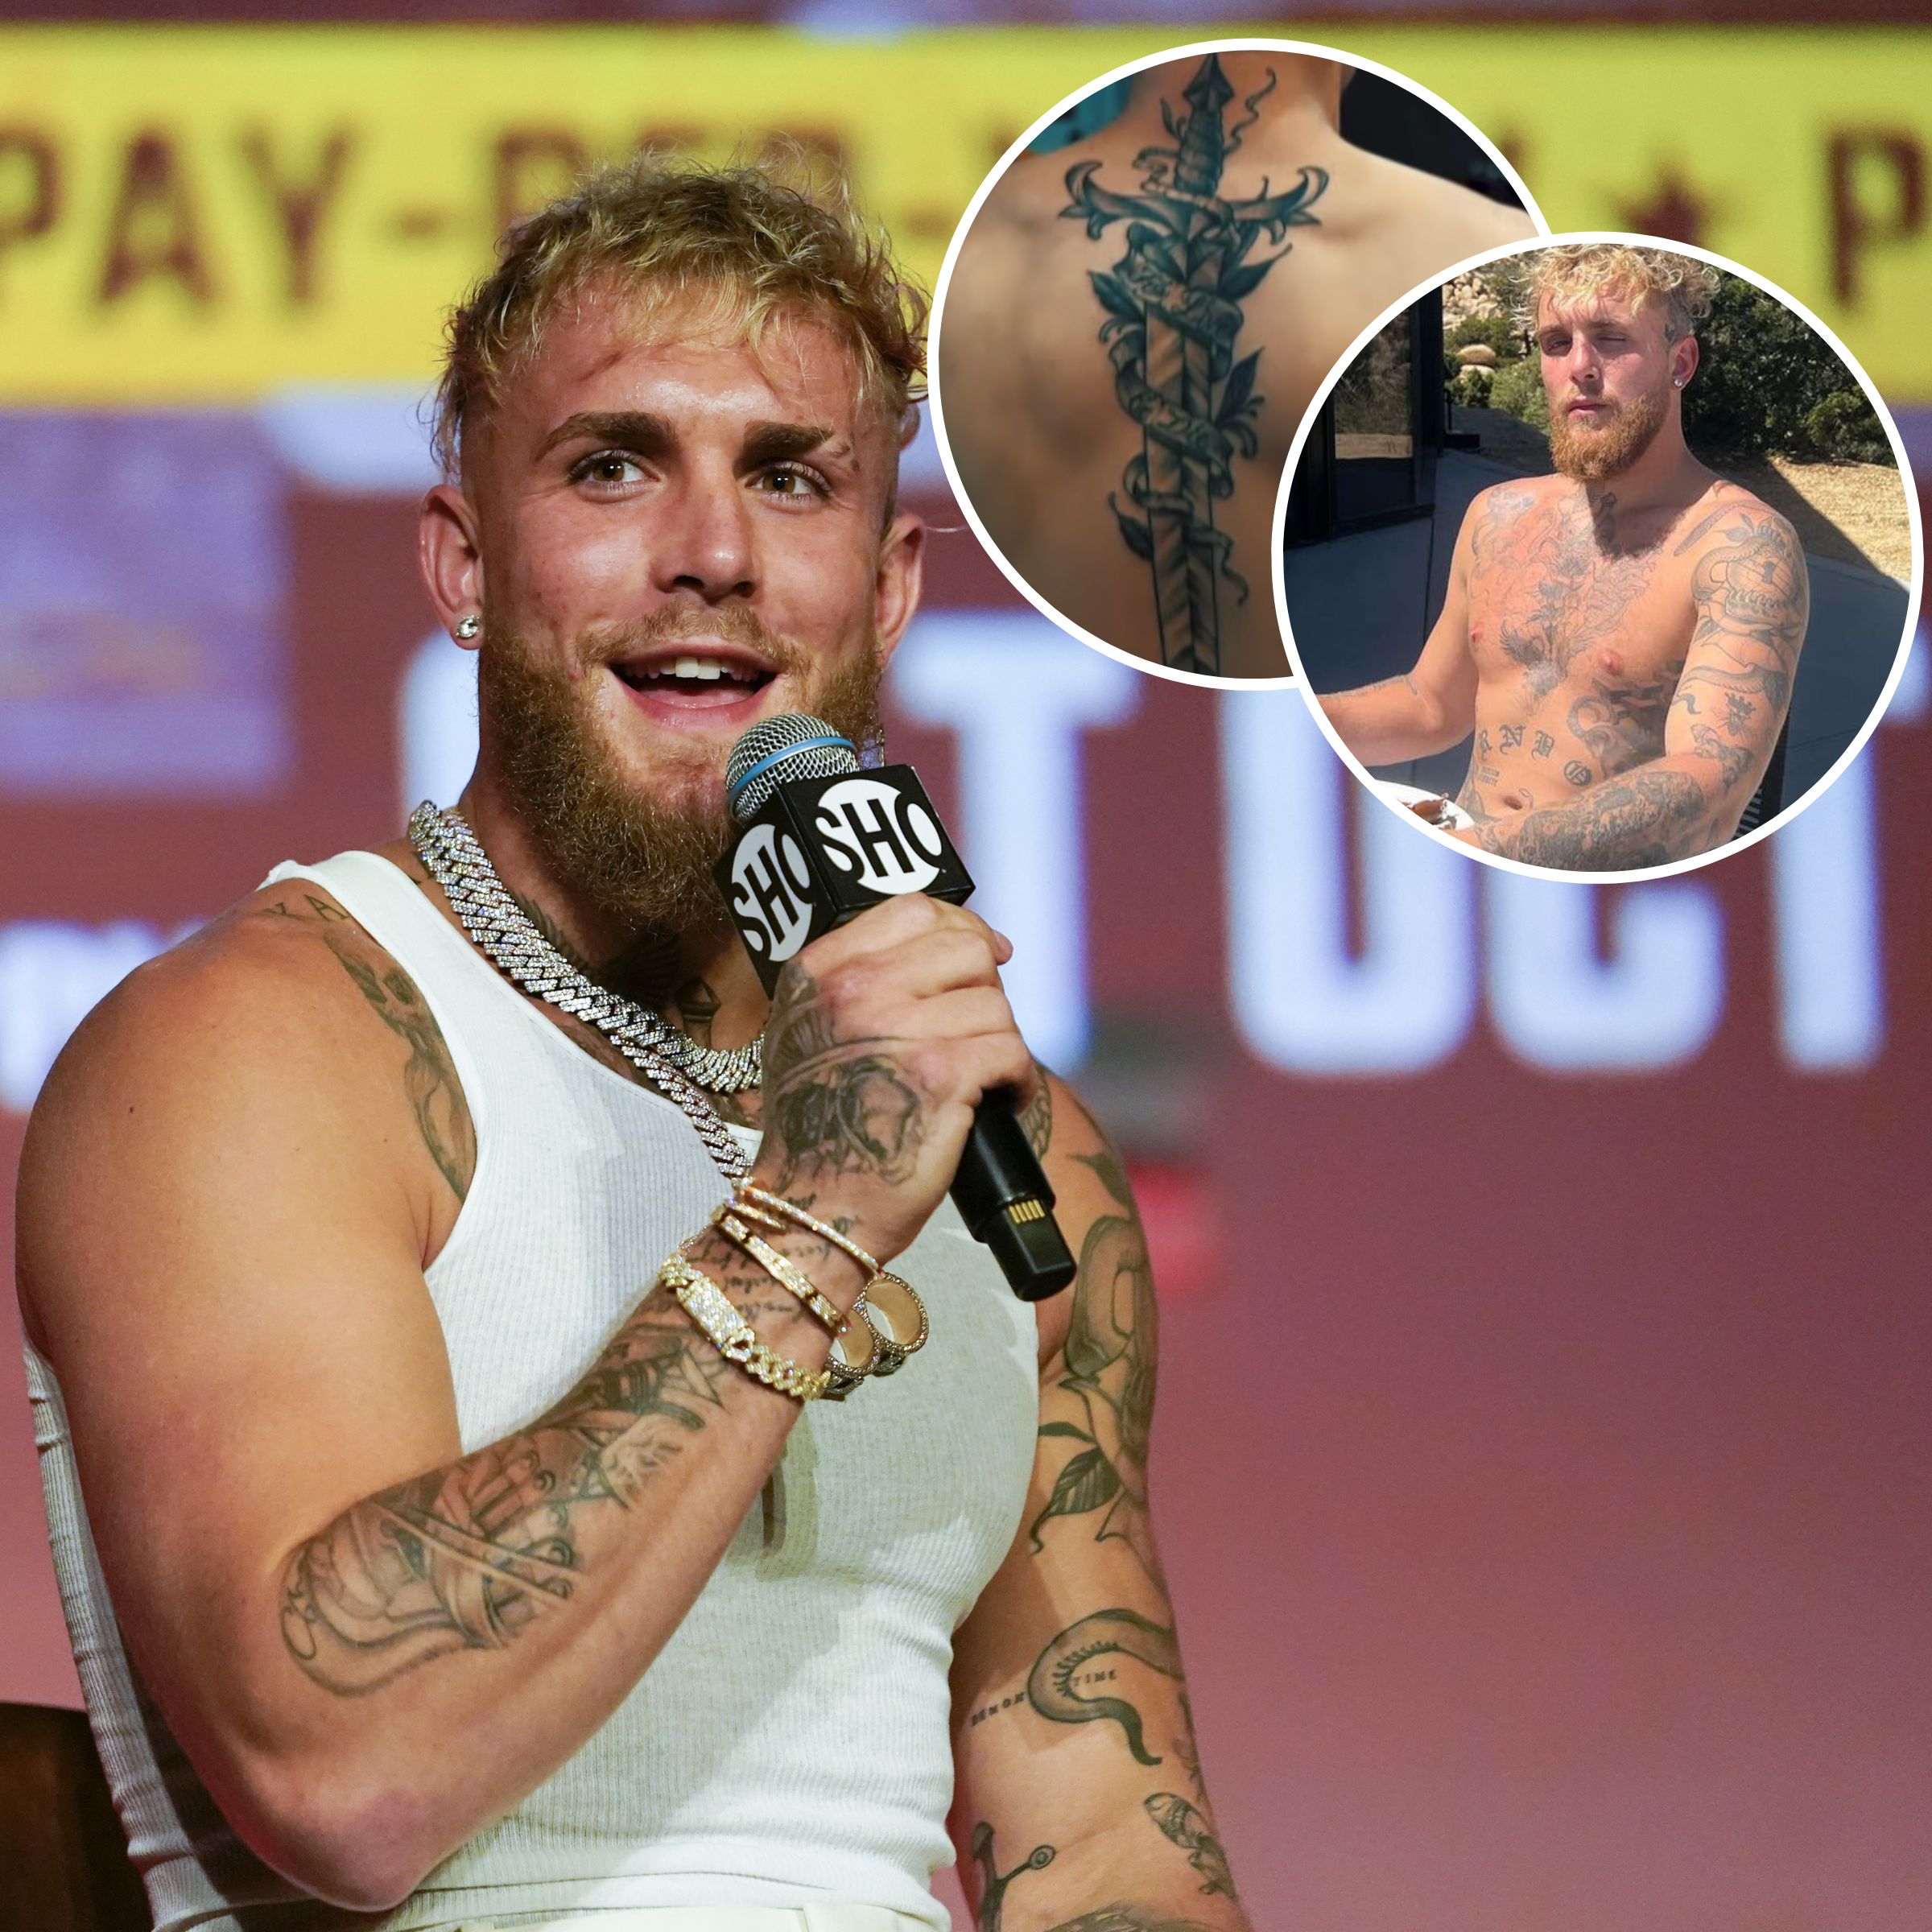 Jake Paul Tattoos Photos of His Ink, Their Meanings